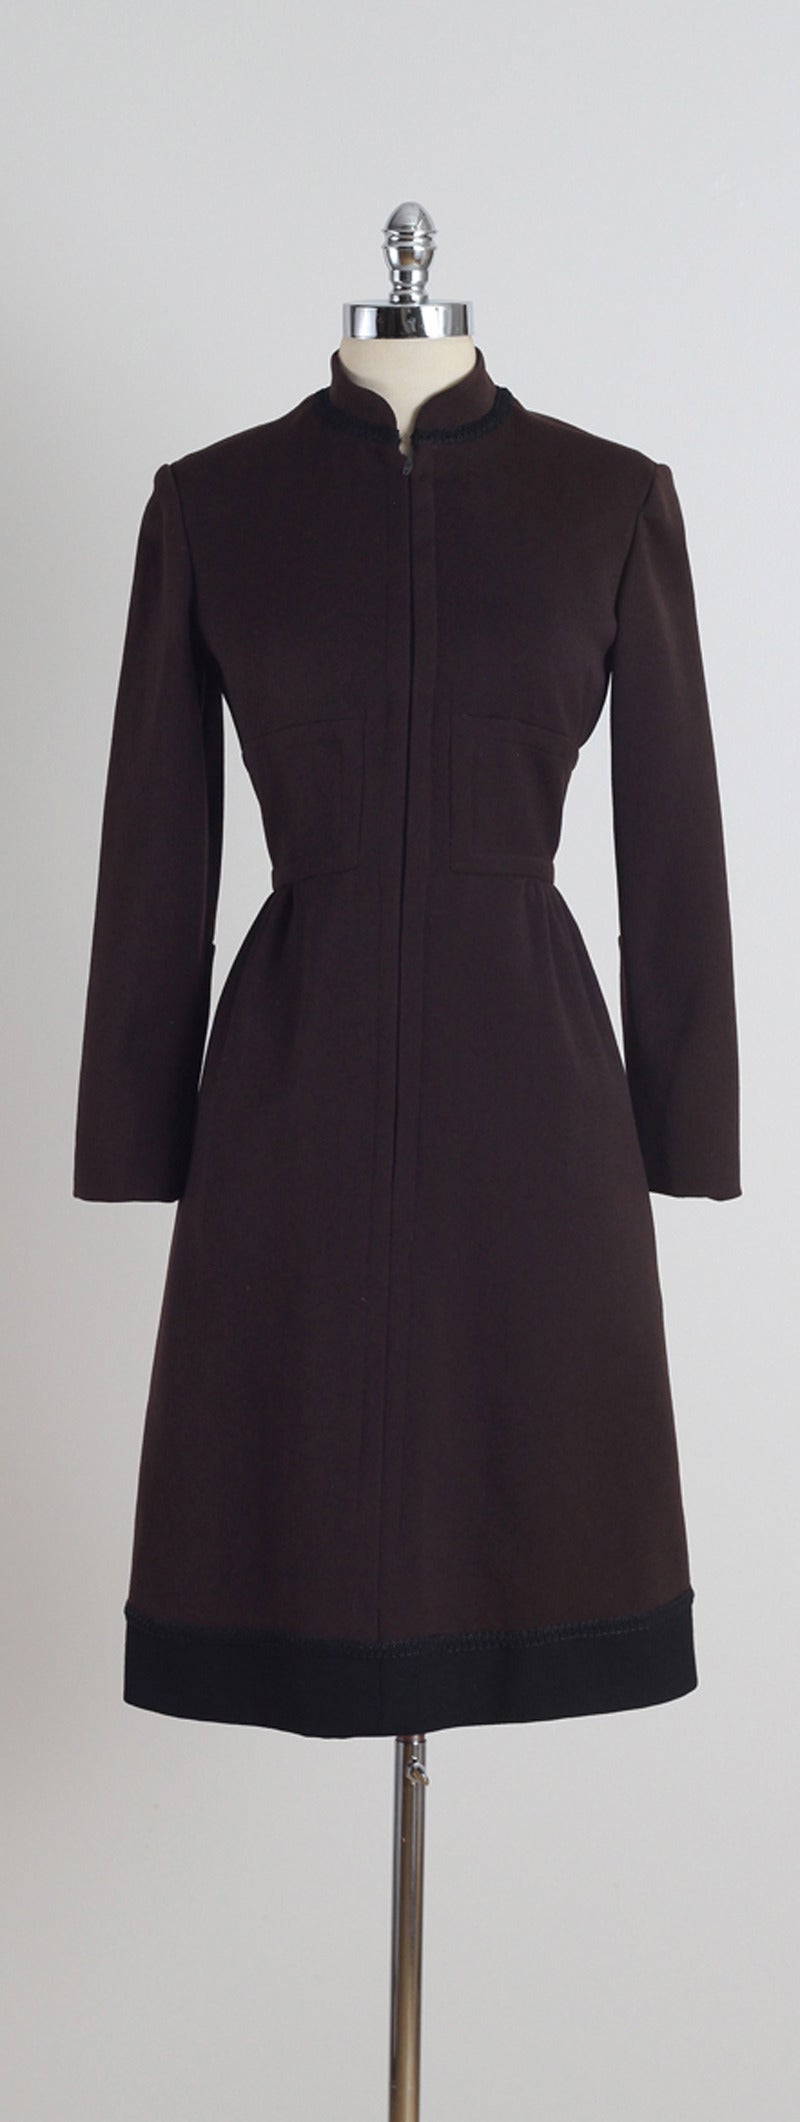 Vintage 1960s Ceil Chapman Wool Military Inspired Dress 5